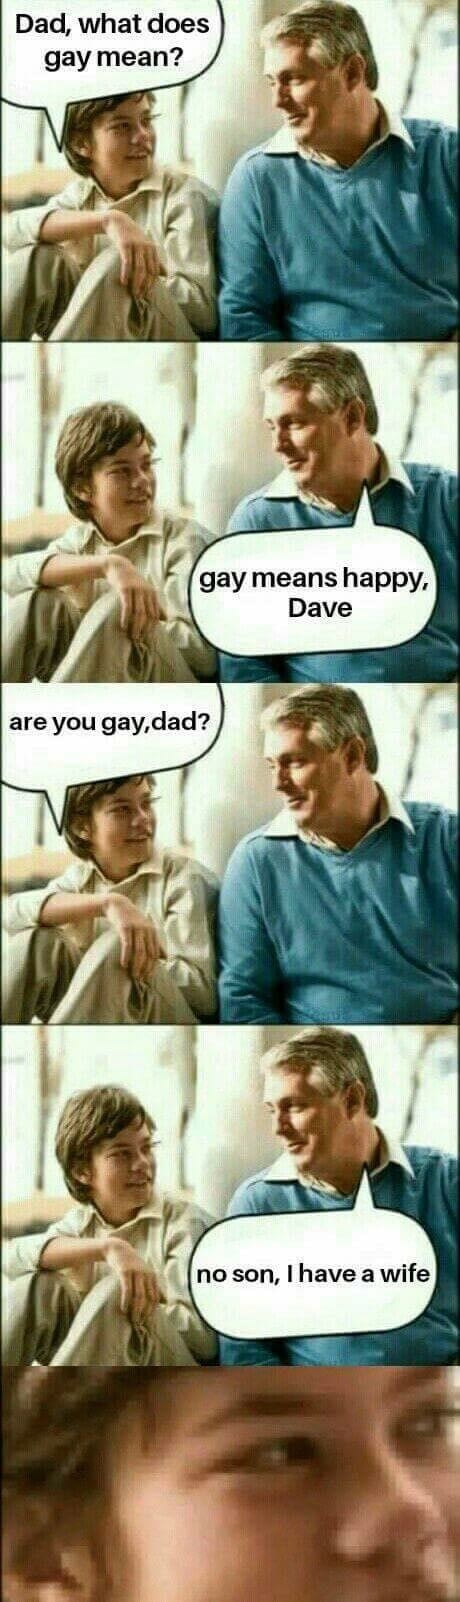 What does gay mean?